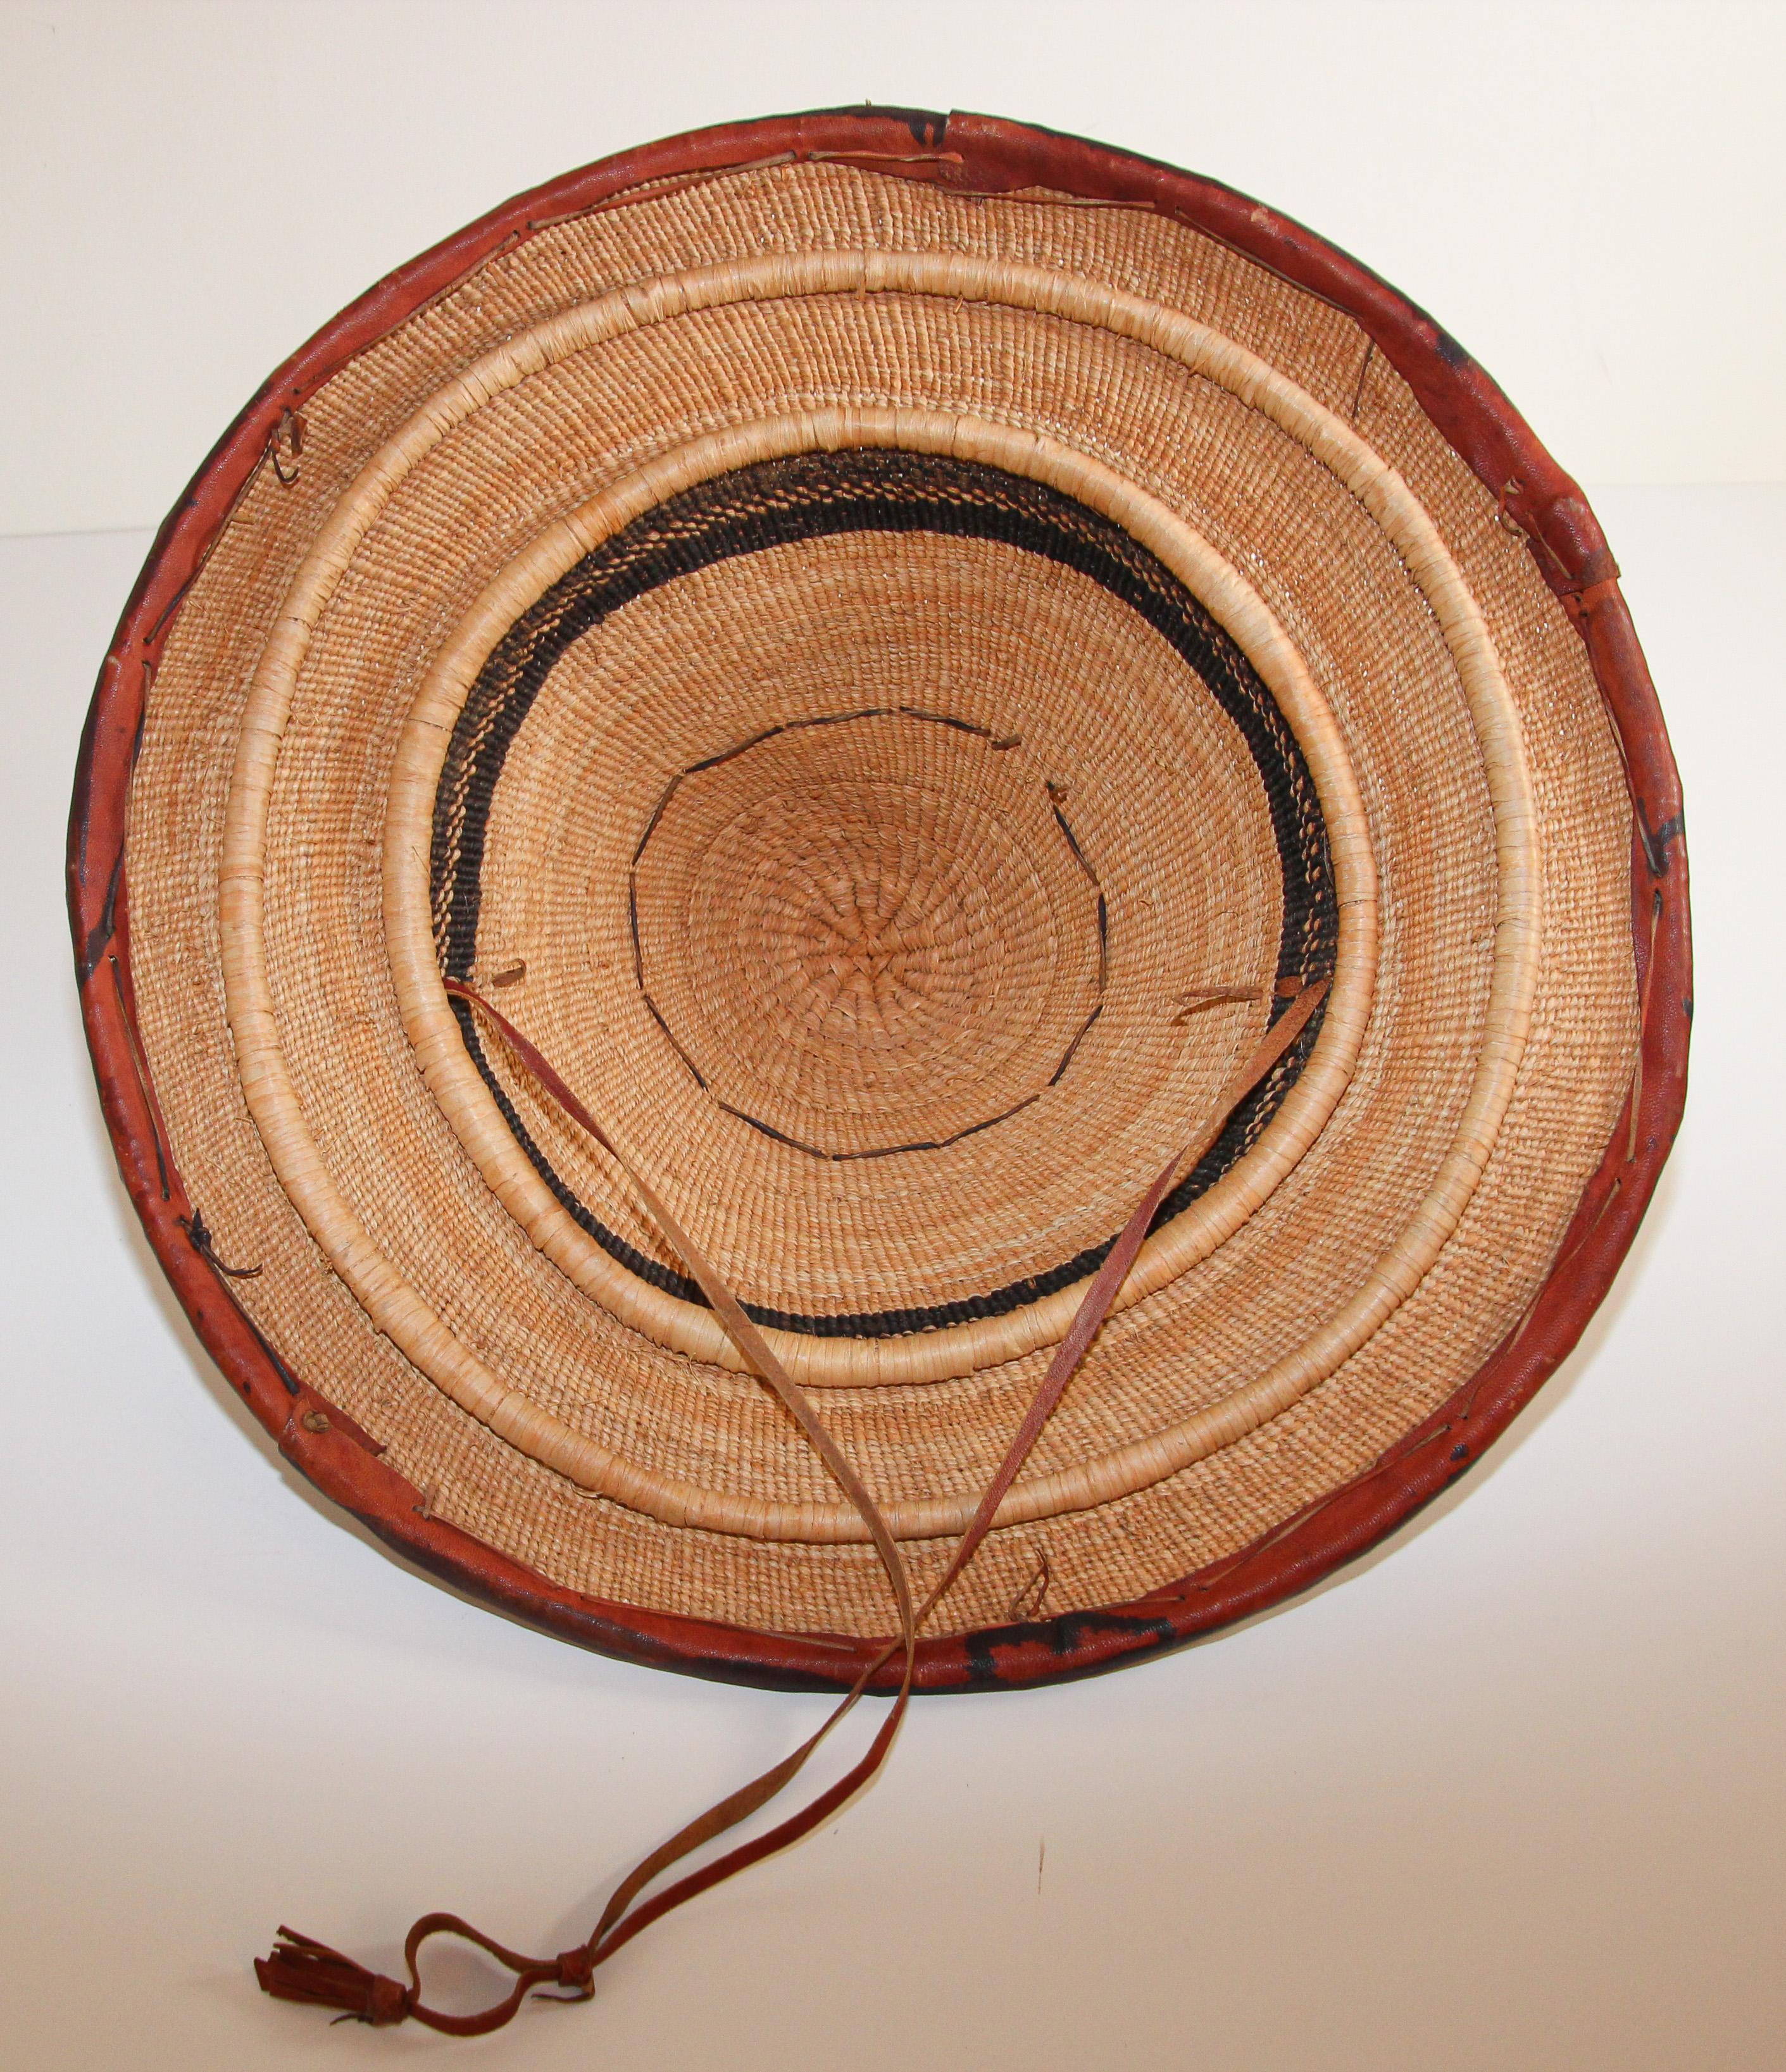 Mali West Africa Conical Leather and Straw Tribal Fulani Hat 2